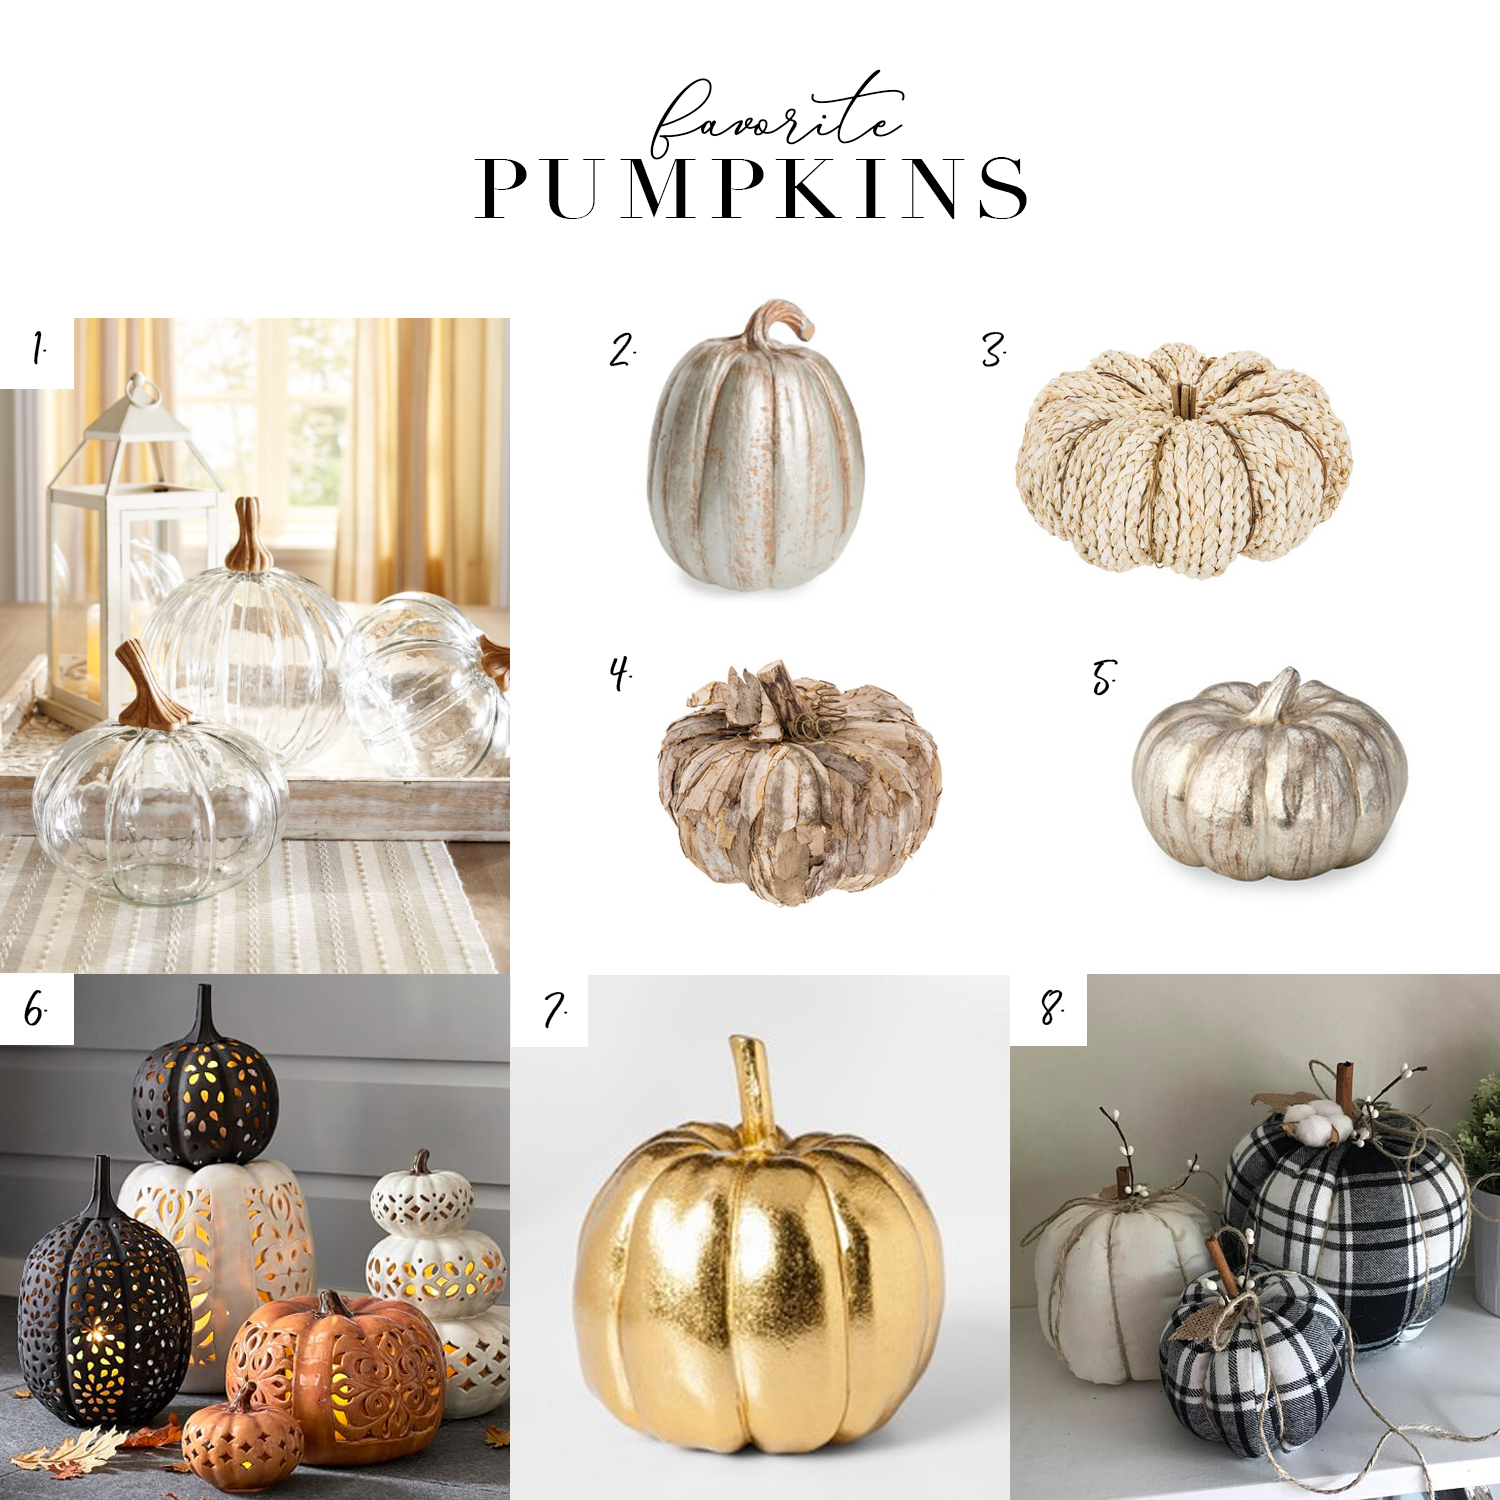 My Favorite Fall Decor Finds this Season from the Haus of Layne blog #Fall #Autumn #FallDecor #HomeDecor